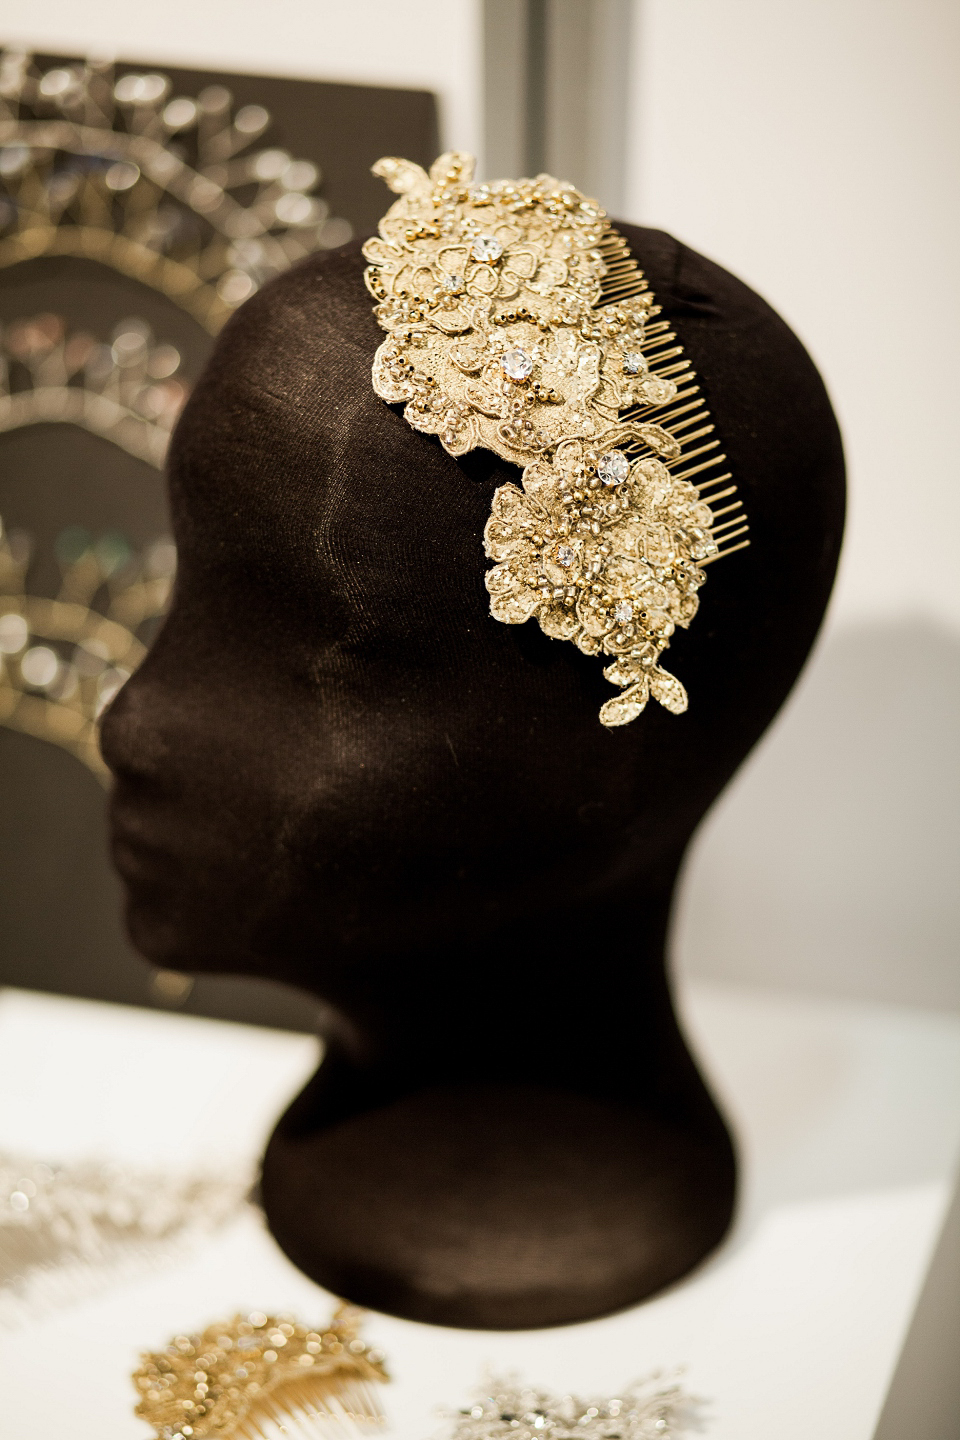 HT Headwear wedding accessories at The White Gallery, London, April 2014